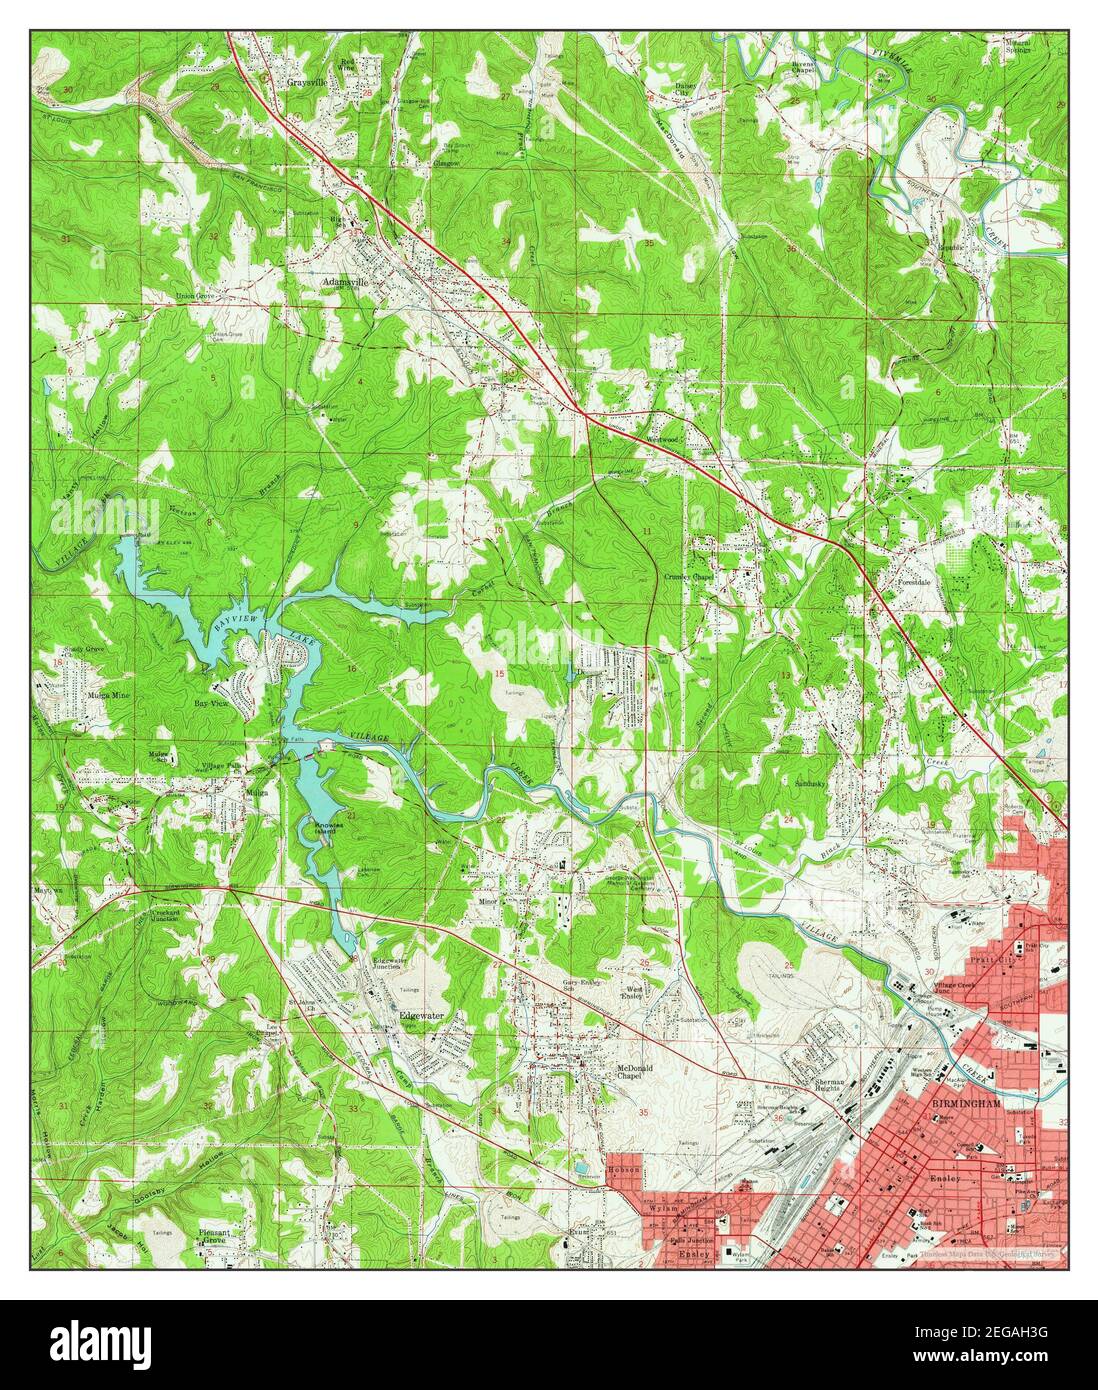 Adamsville, Alabama, map 1959, 1:24000, United States of America by Timeless Maps, data U.S. Geological Survey Stock Photo